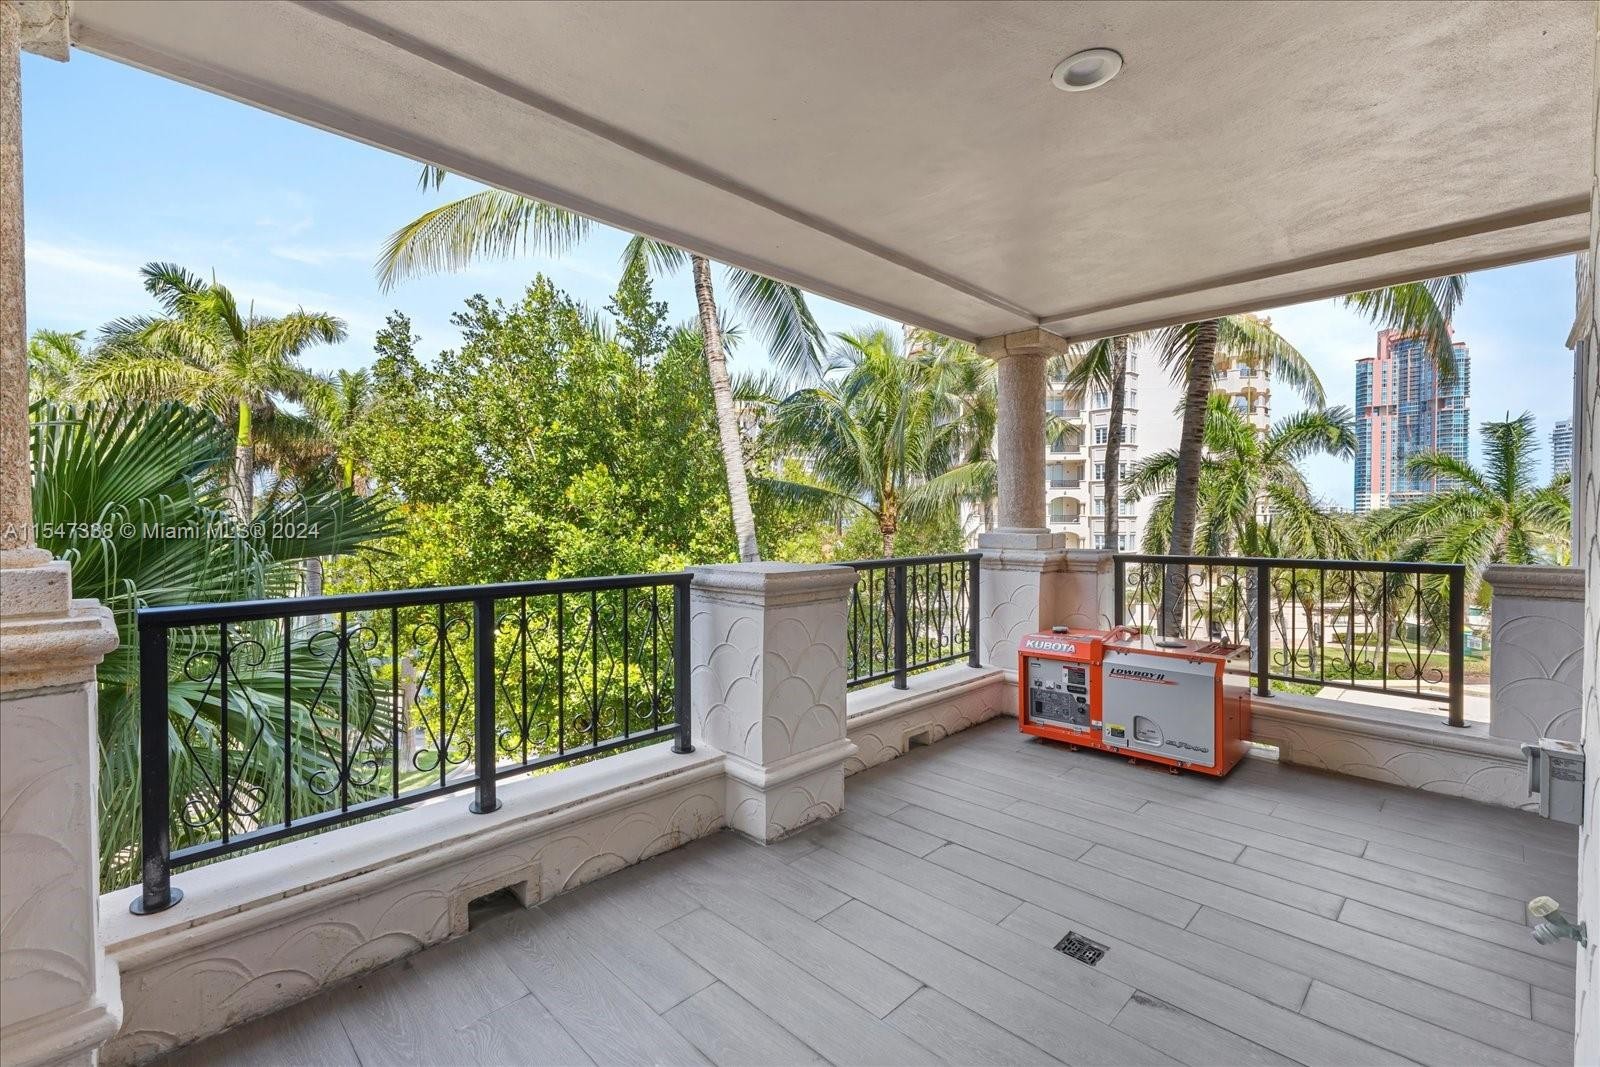 46. 7431 Fisher Island Dr